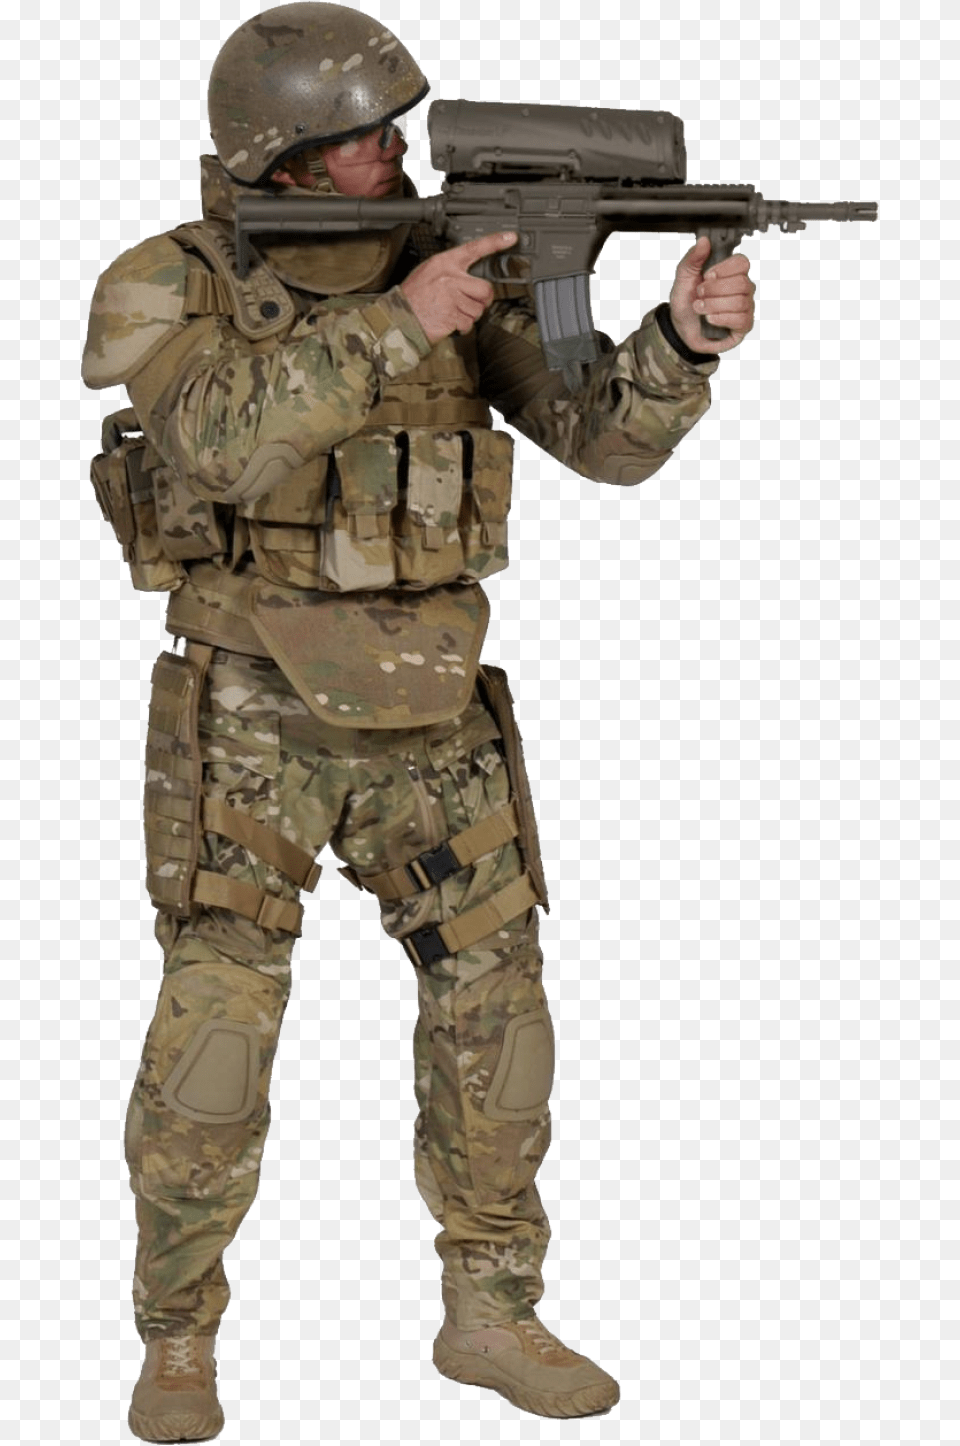 Soldiers 3 Image New Army Uniform 2010, Weapon, Firearm, Gun, Rifle Free Png Download